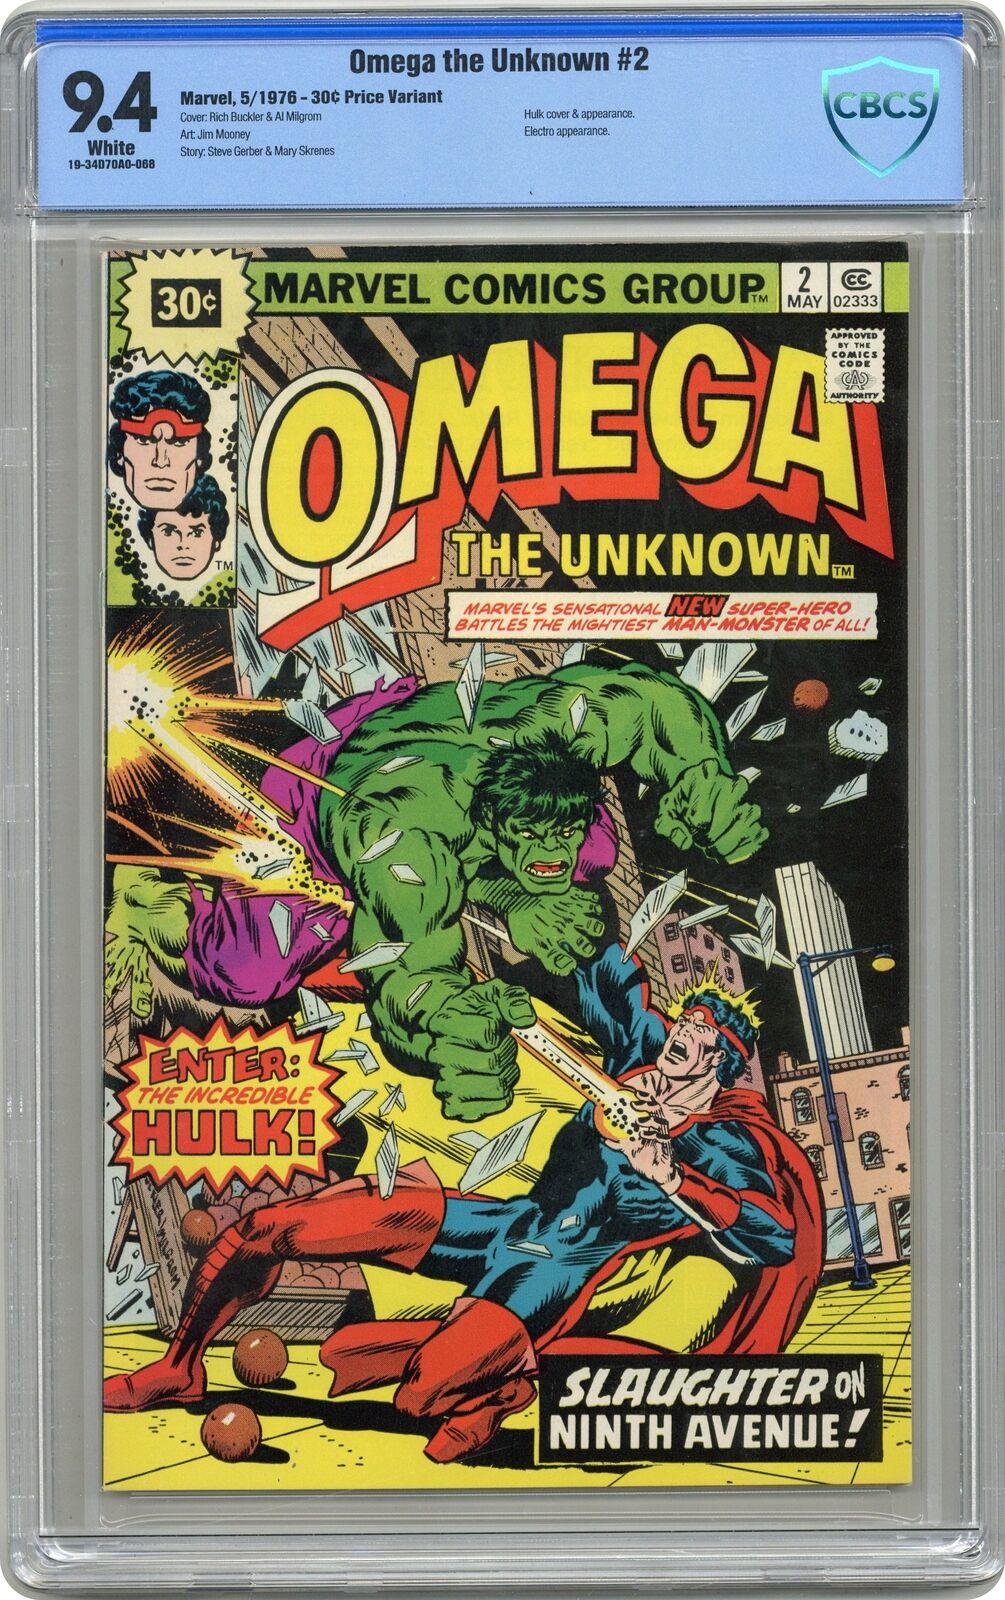 Omega The Unknown 30 Cent Edition #2 CBCS 9.4 1976 19-34D70A0-068